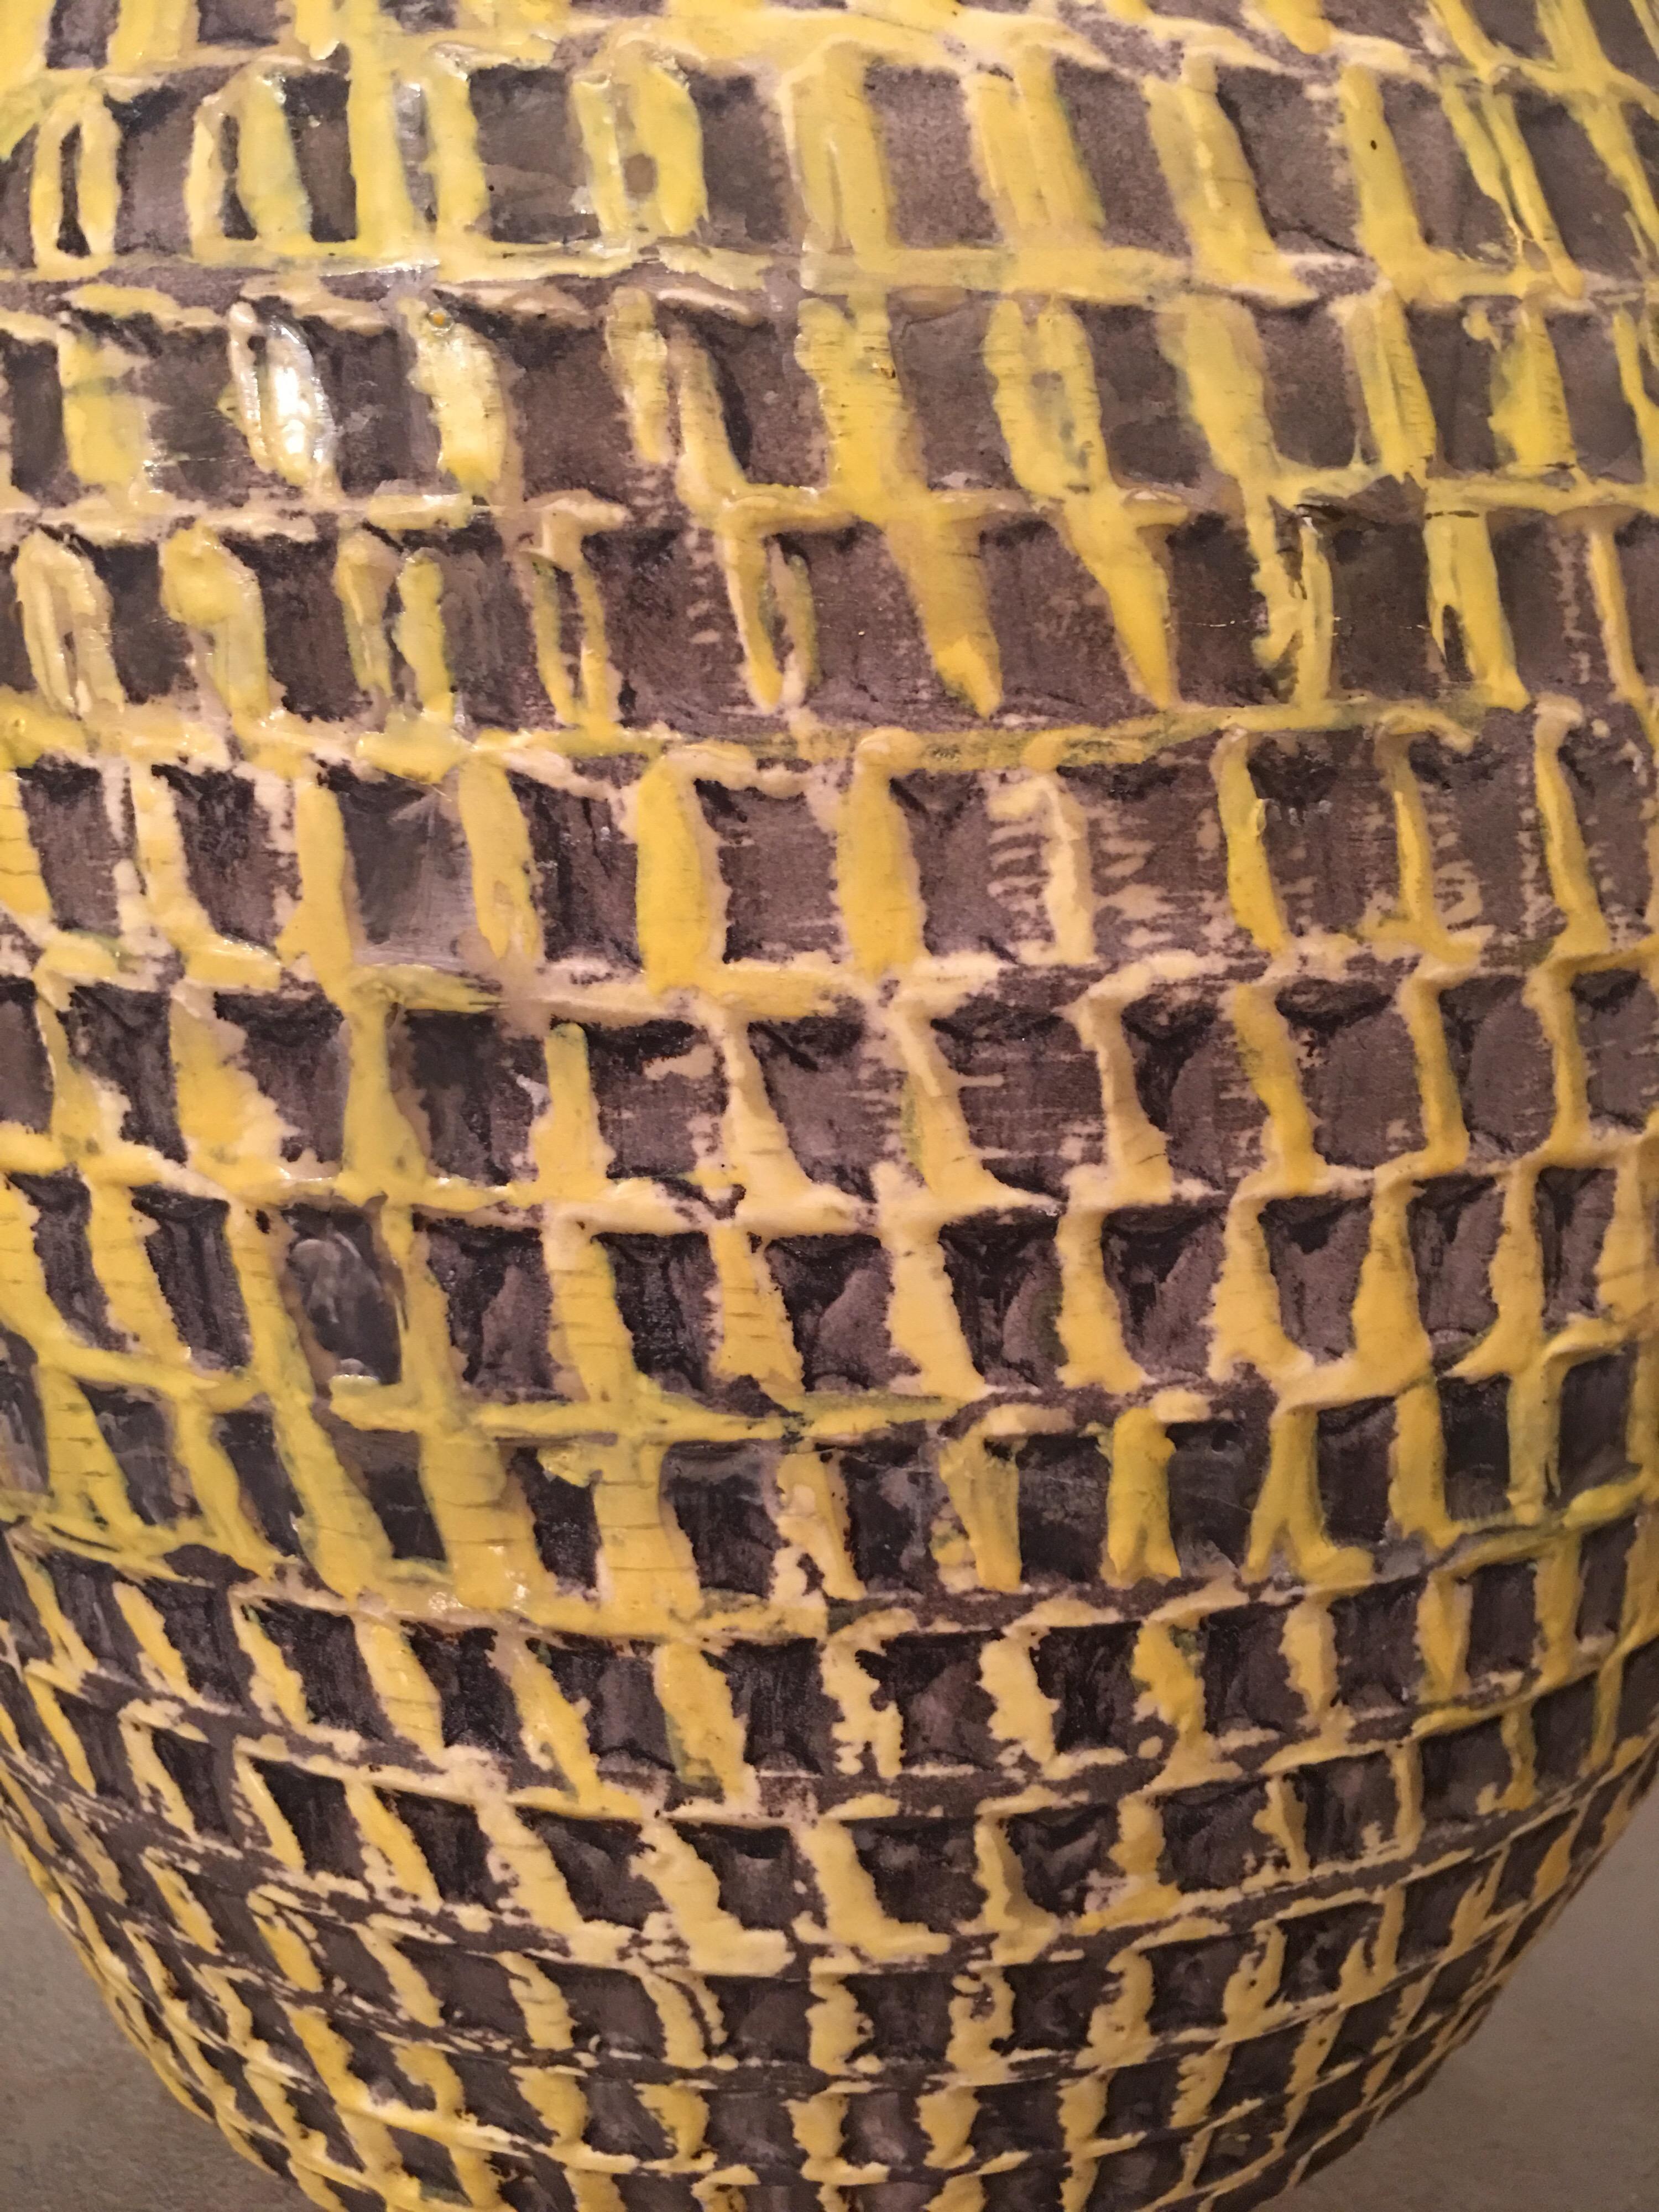 Jean Besnard Signed Large Yellow Ceramic Vase, Incised Decor, French, 1930s For Sale 5